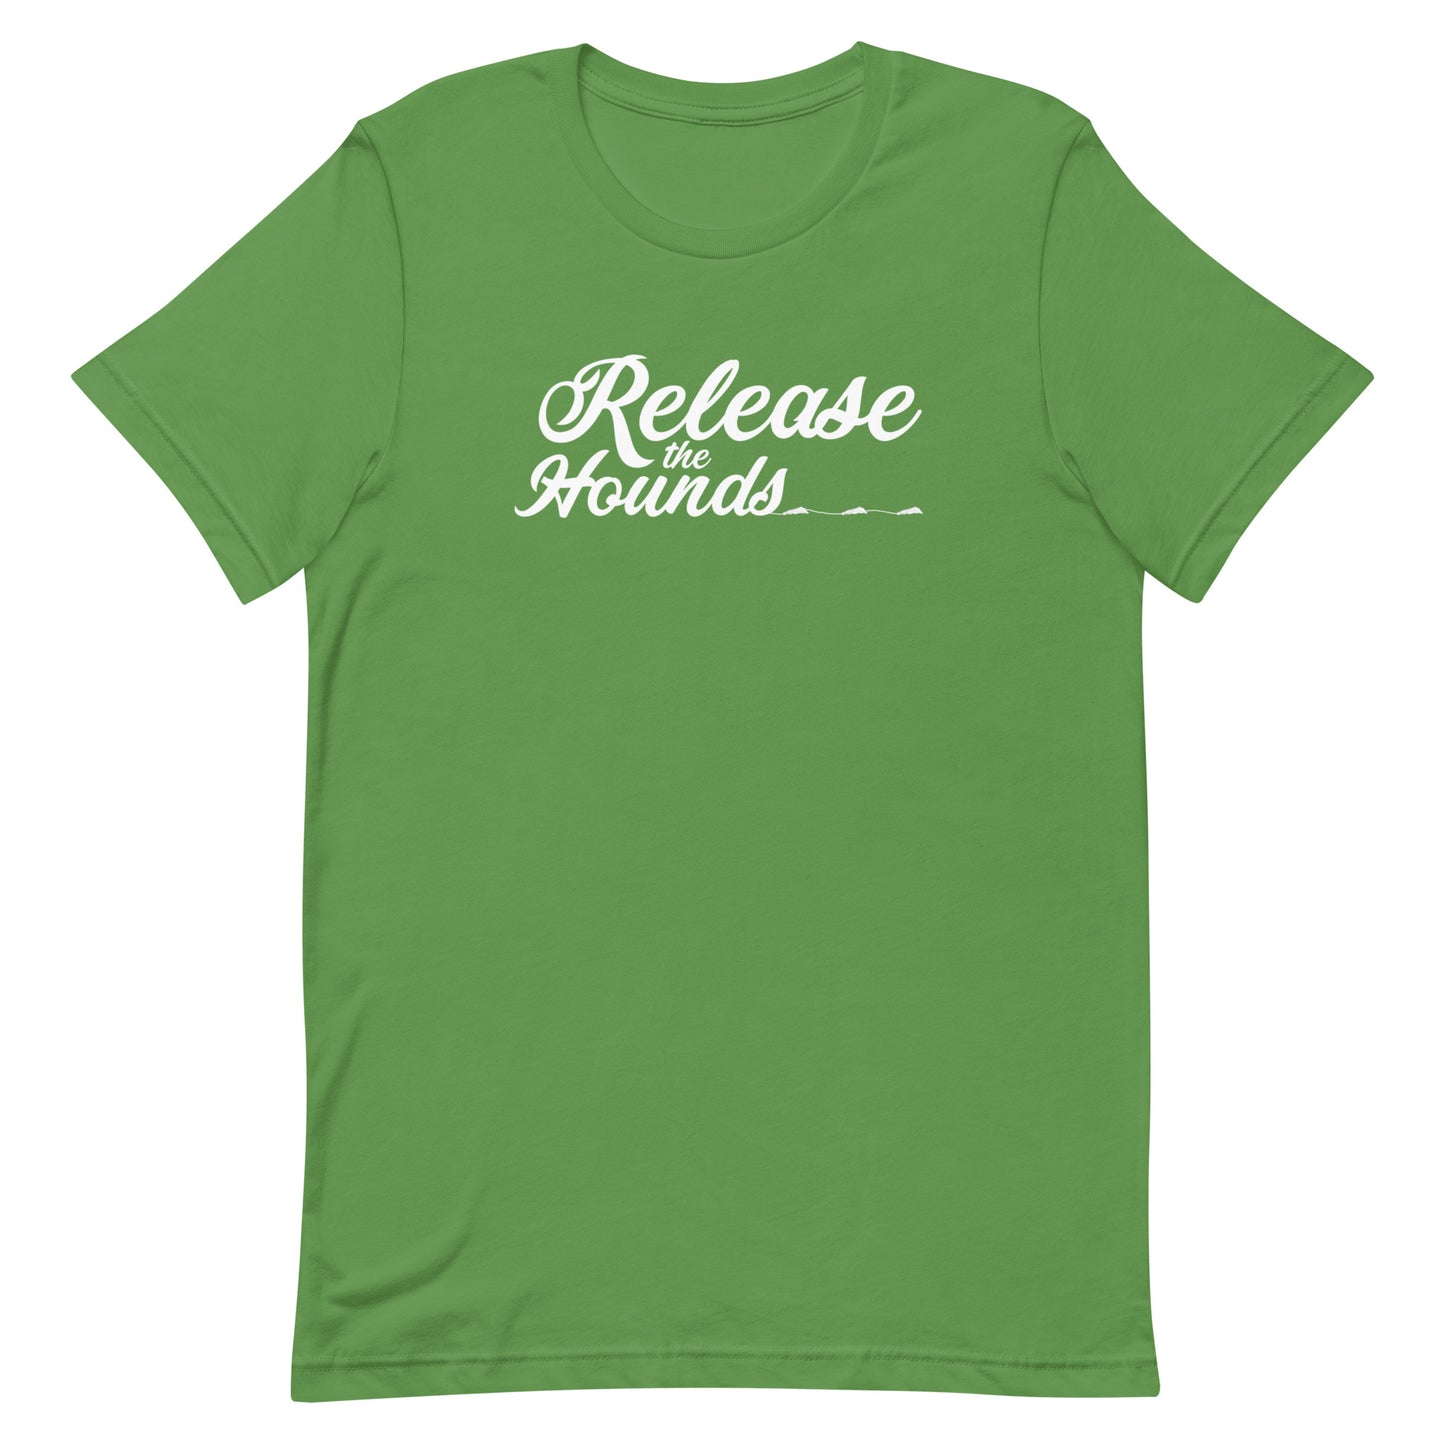 RELEASE THE HOUNDS - Unisex t-shirt